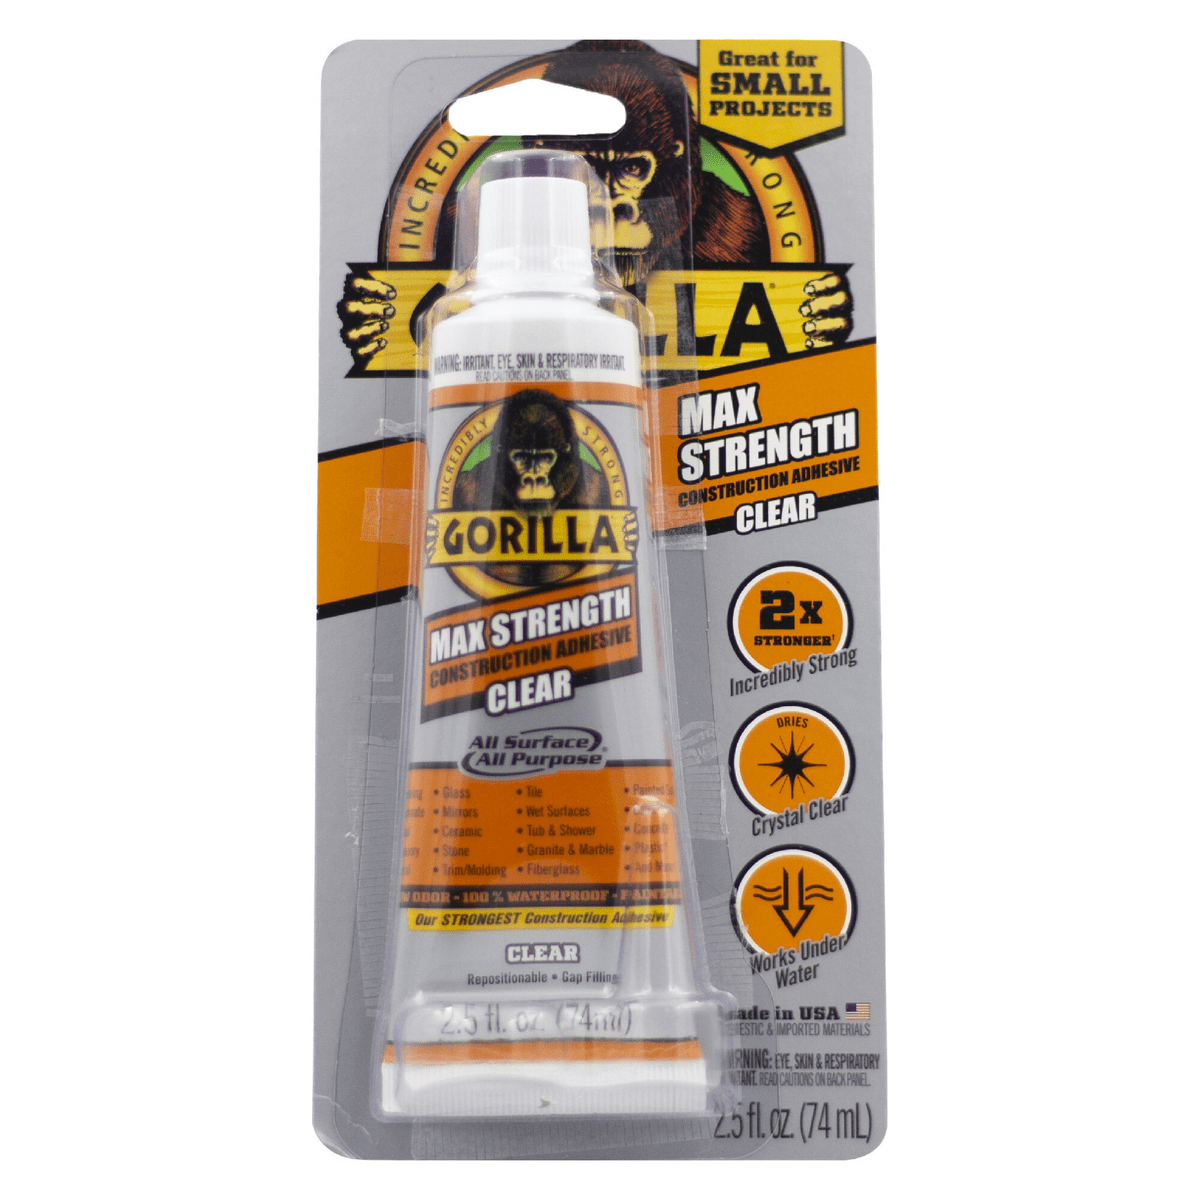 (2 pack) Gorilla Glue HD Contact Adhesive Spray 12.2oz Can Recommended  Surface: Hardware